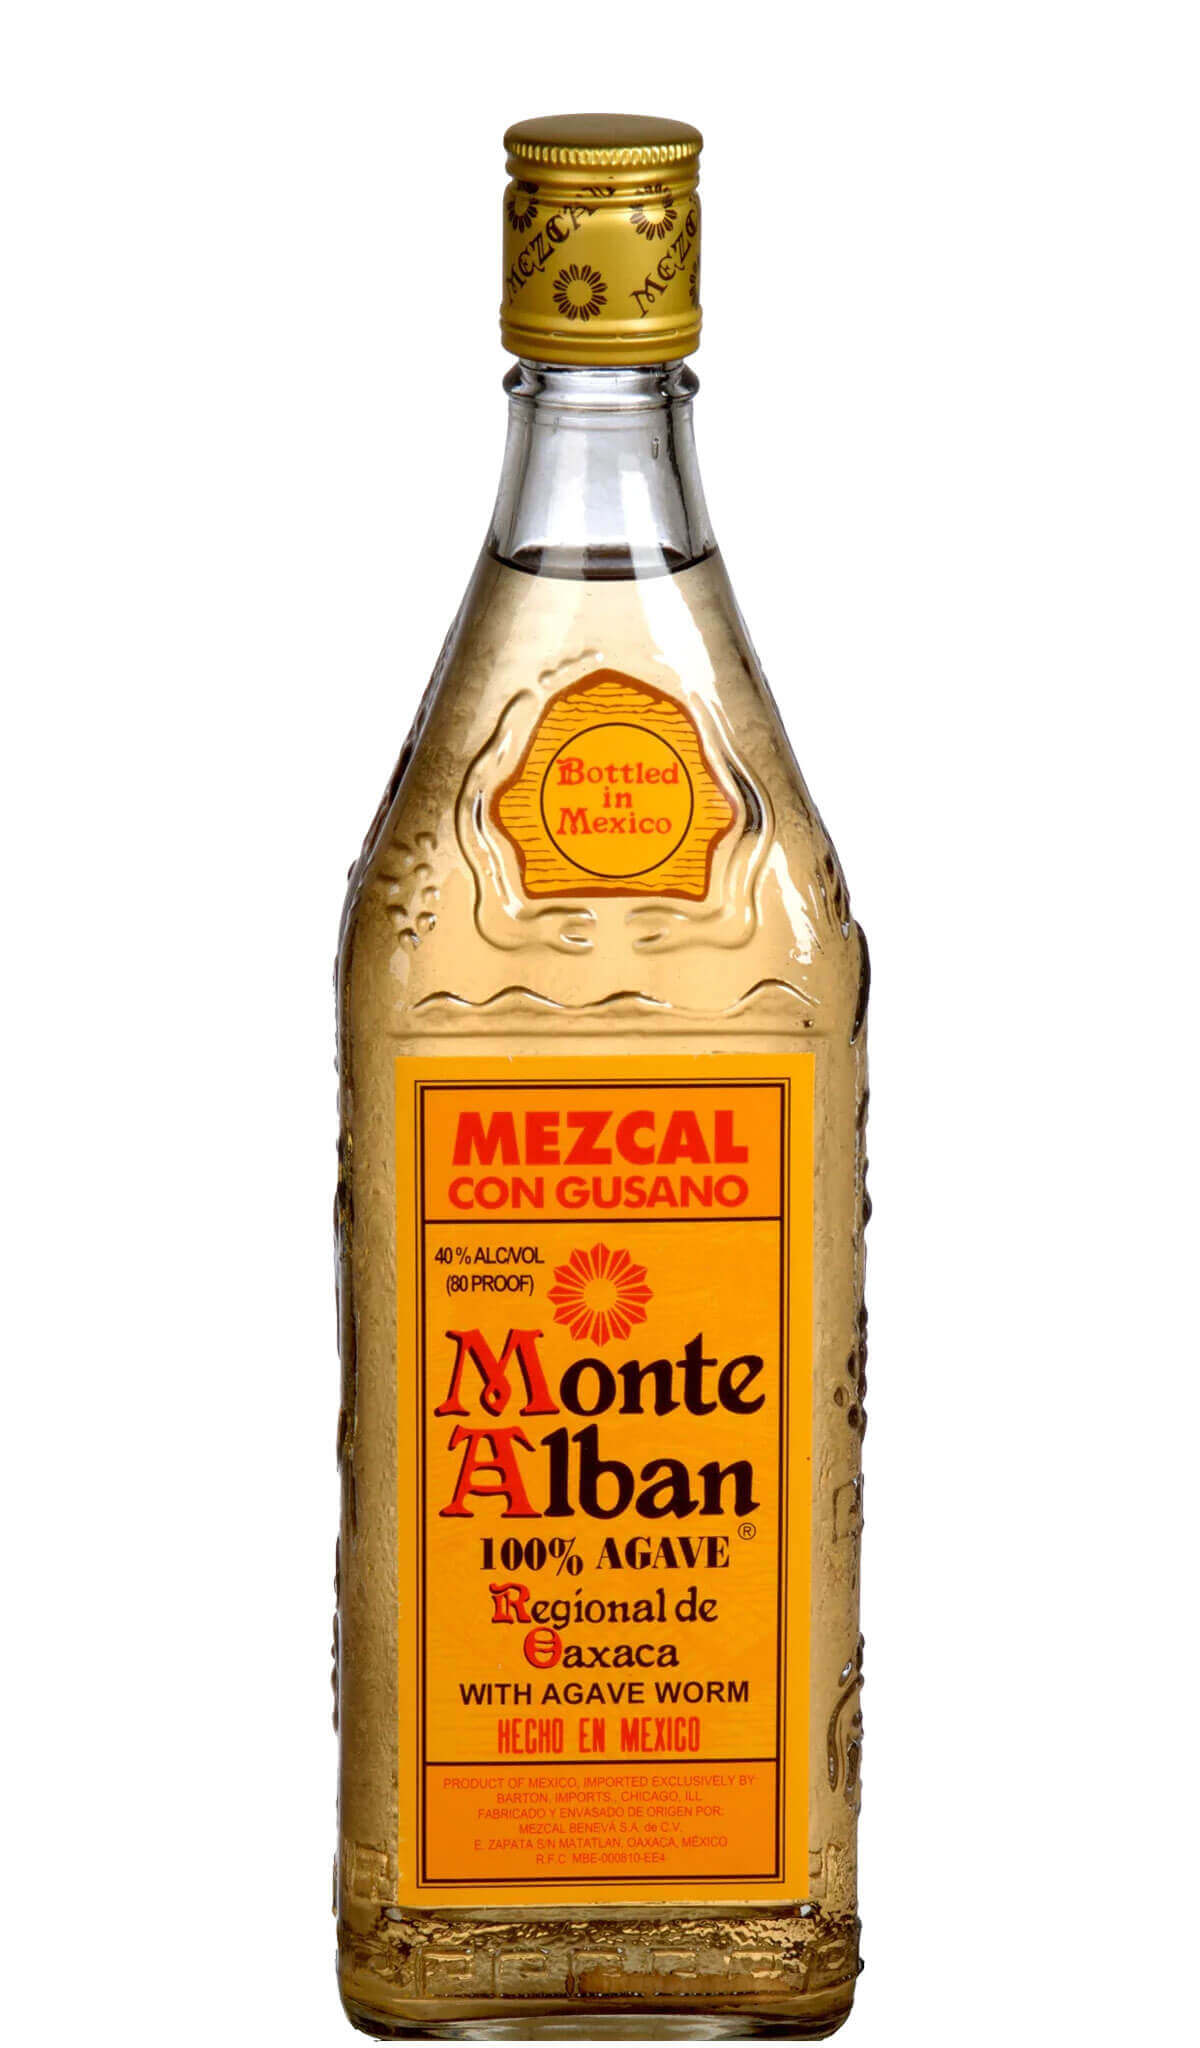 Find out more, explore the range and buy Monte Alban Mezcal 100% Agave 700ml available online at Wine Sellers Direct - Australia's independent liquor specialists.